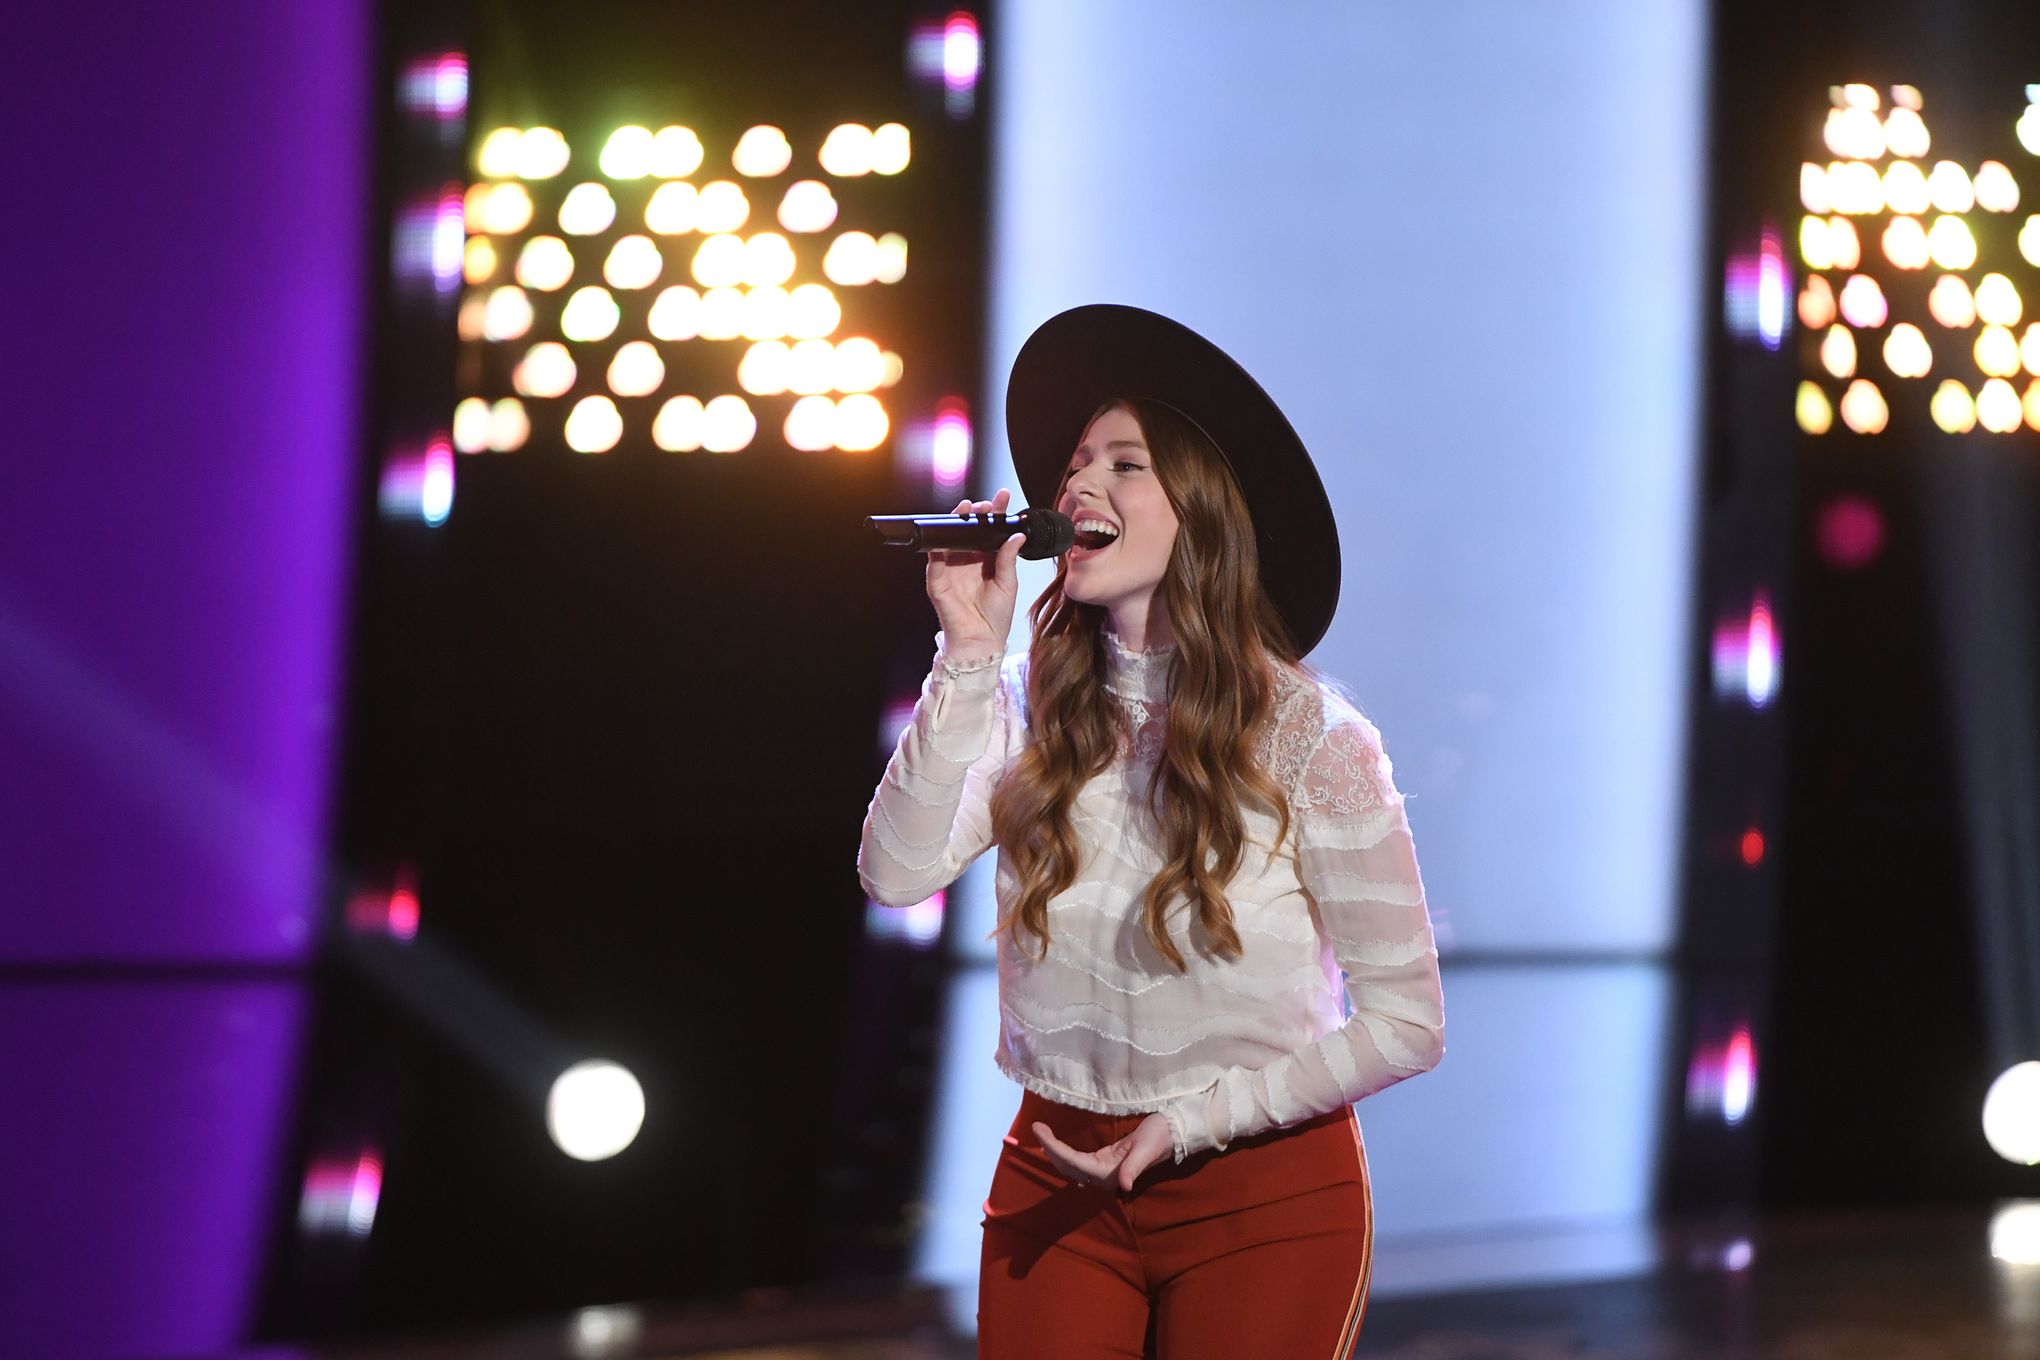 Here's how Maple Valley's Zan Fiskum did on 'The Voice' this week